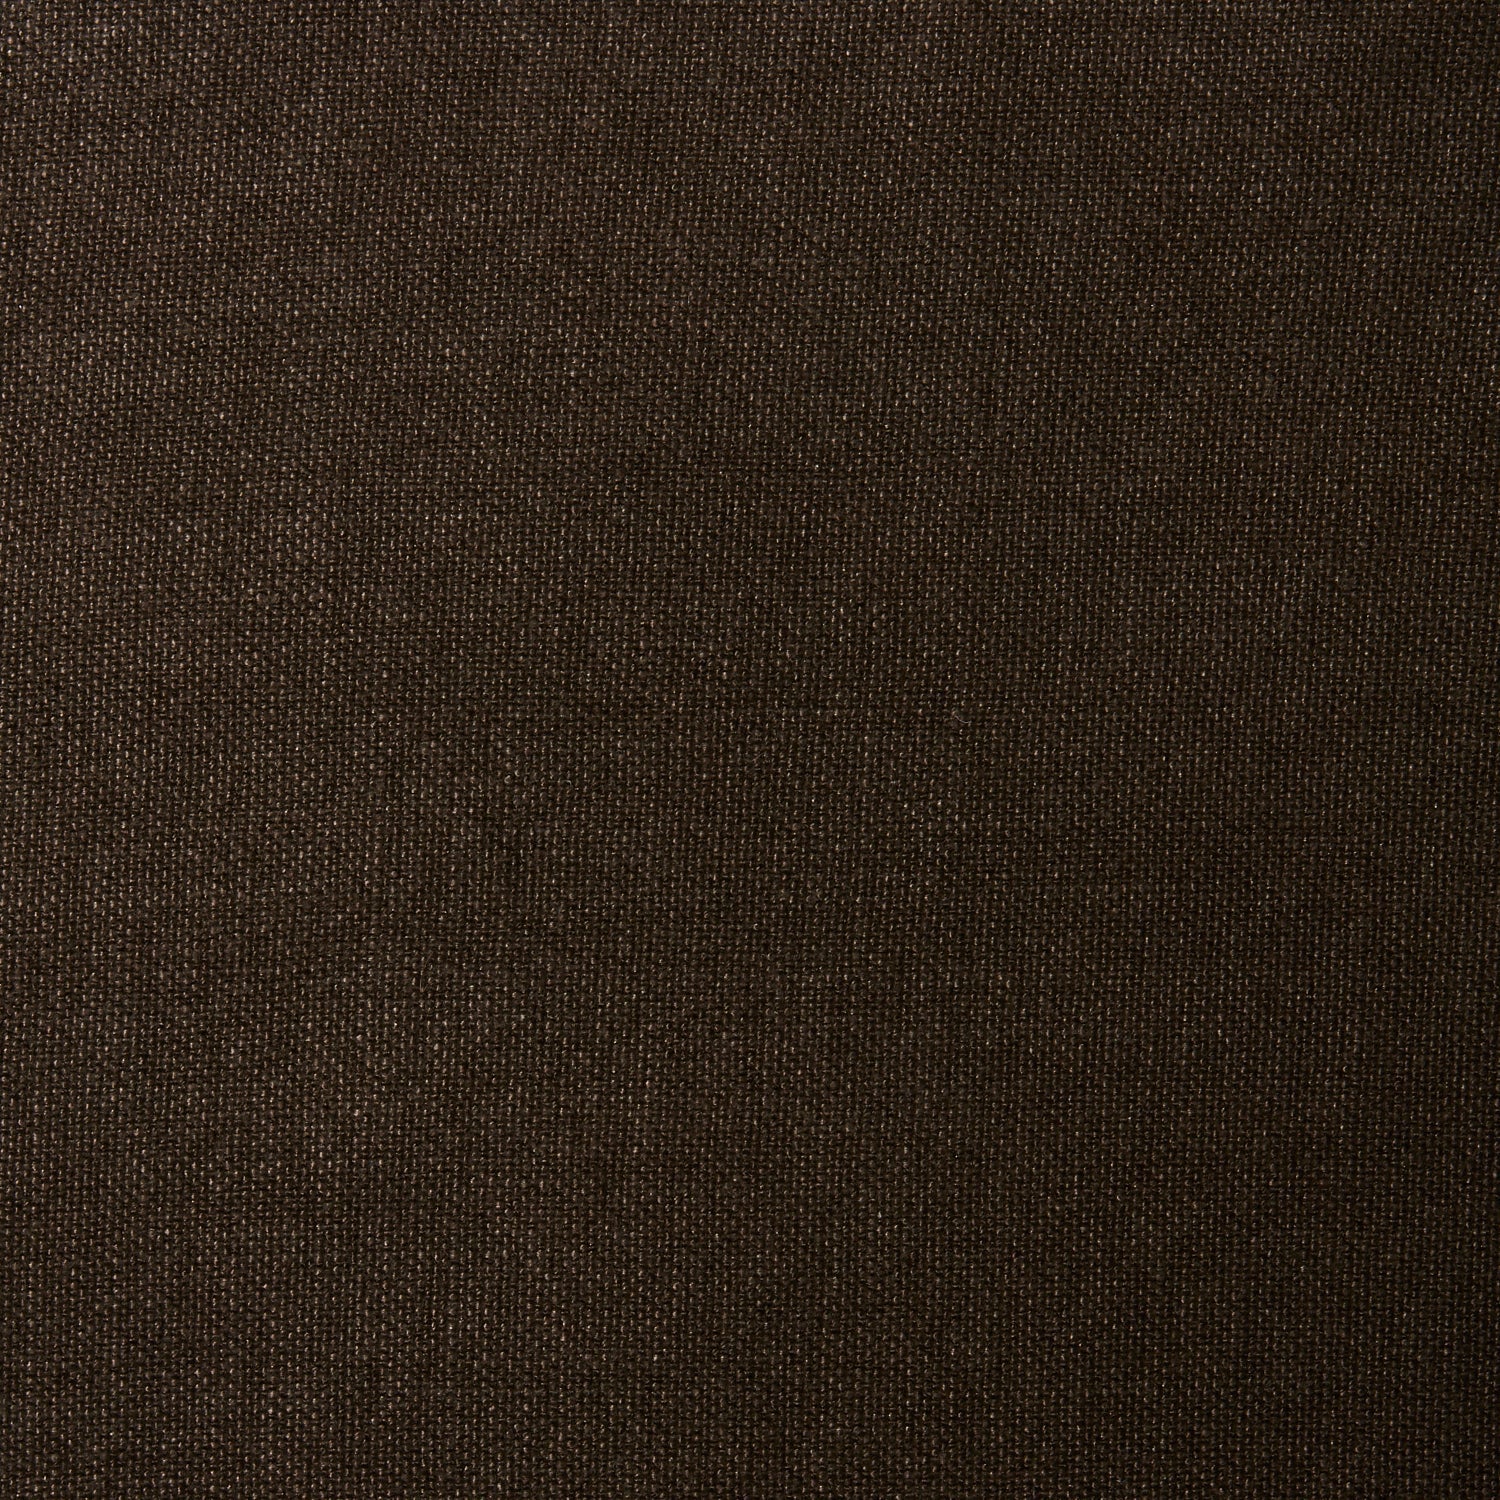 A swatch of old-world linen fabric in a solid dark brown color.